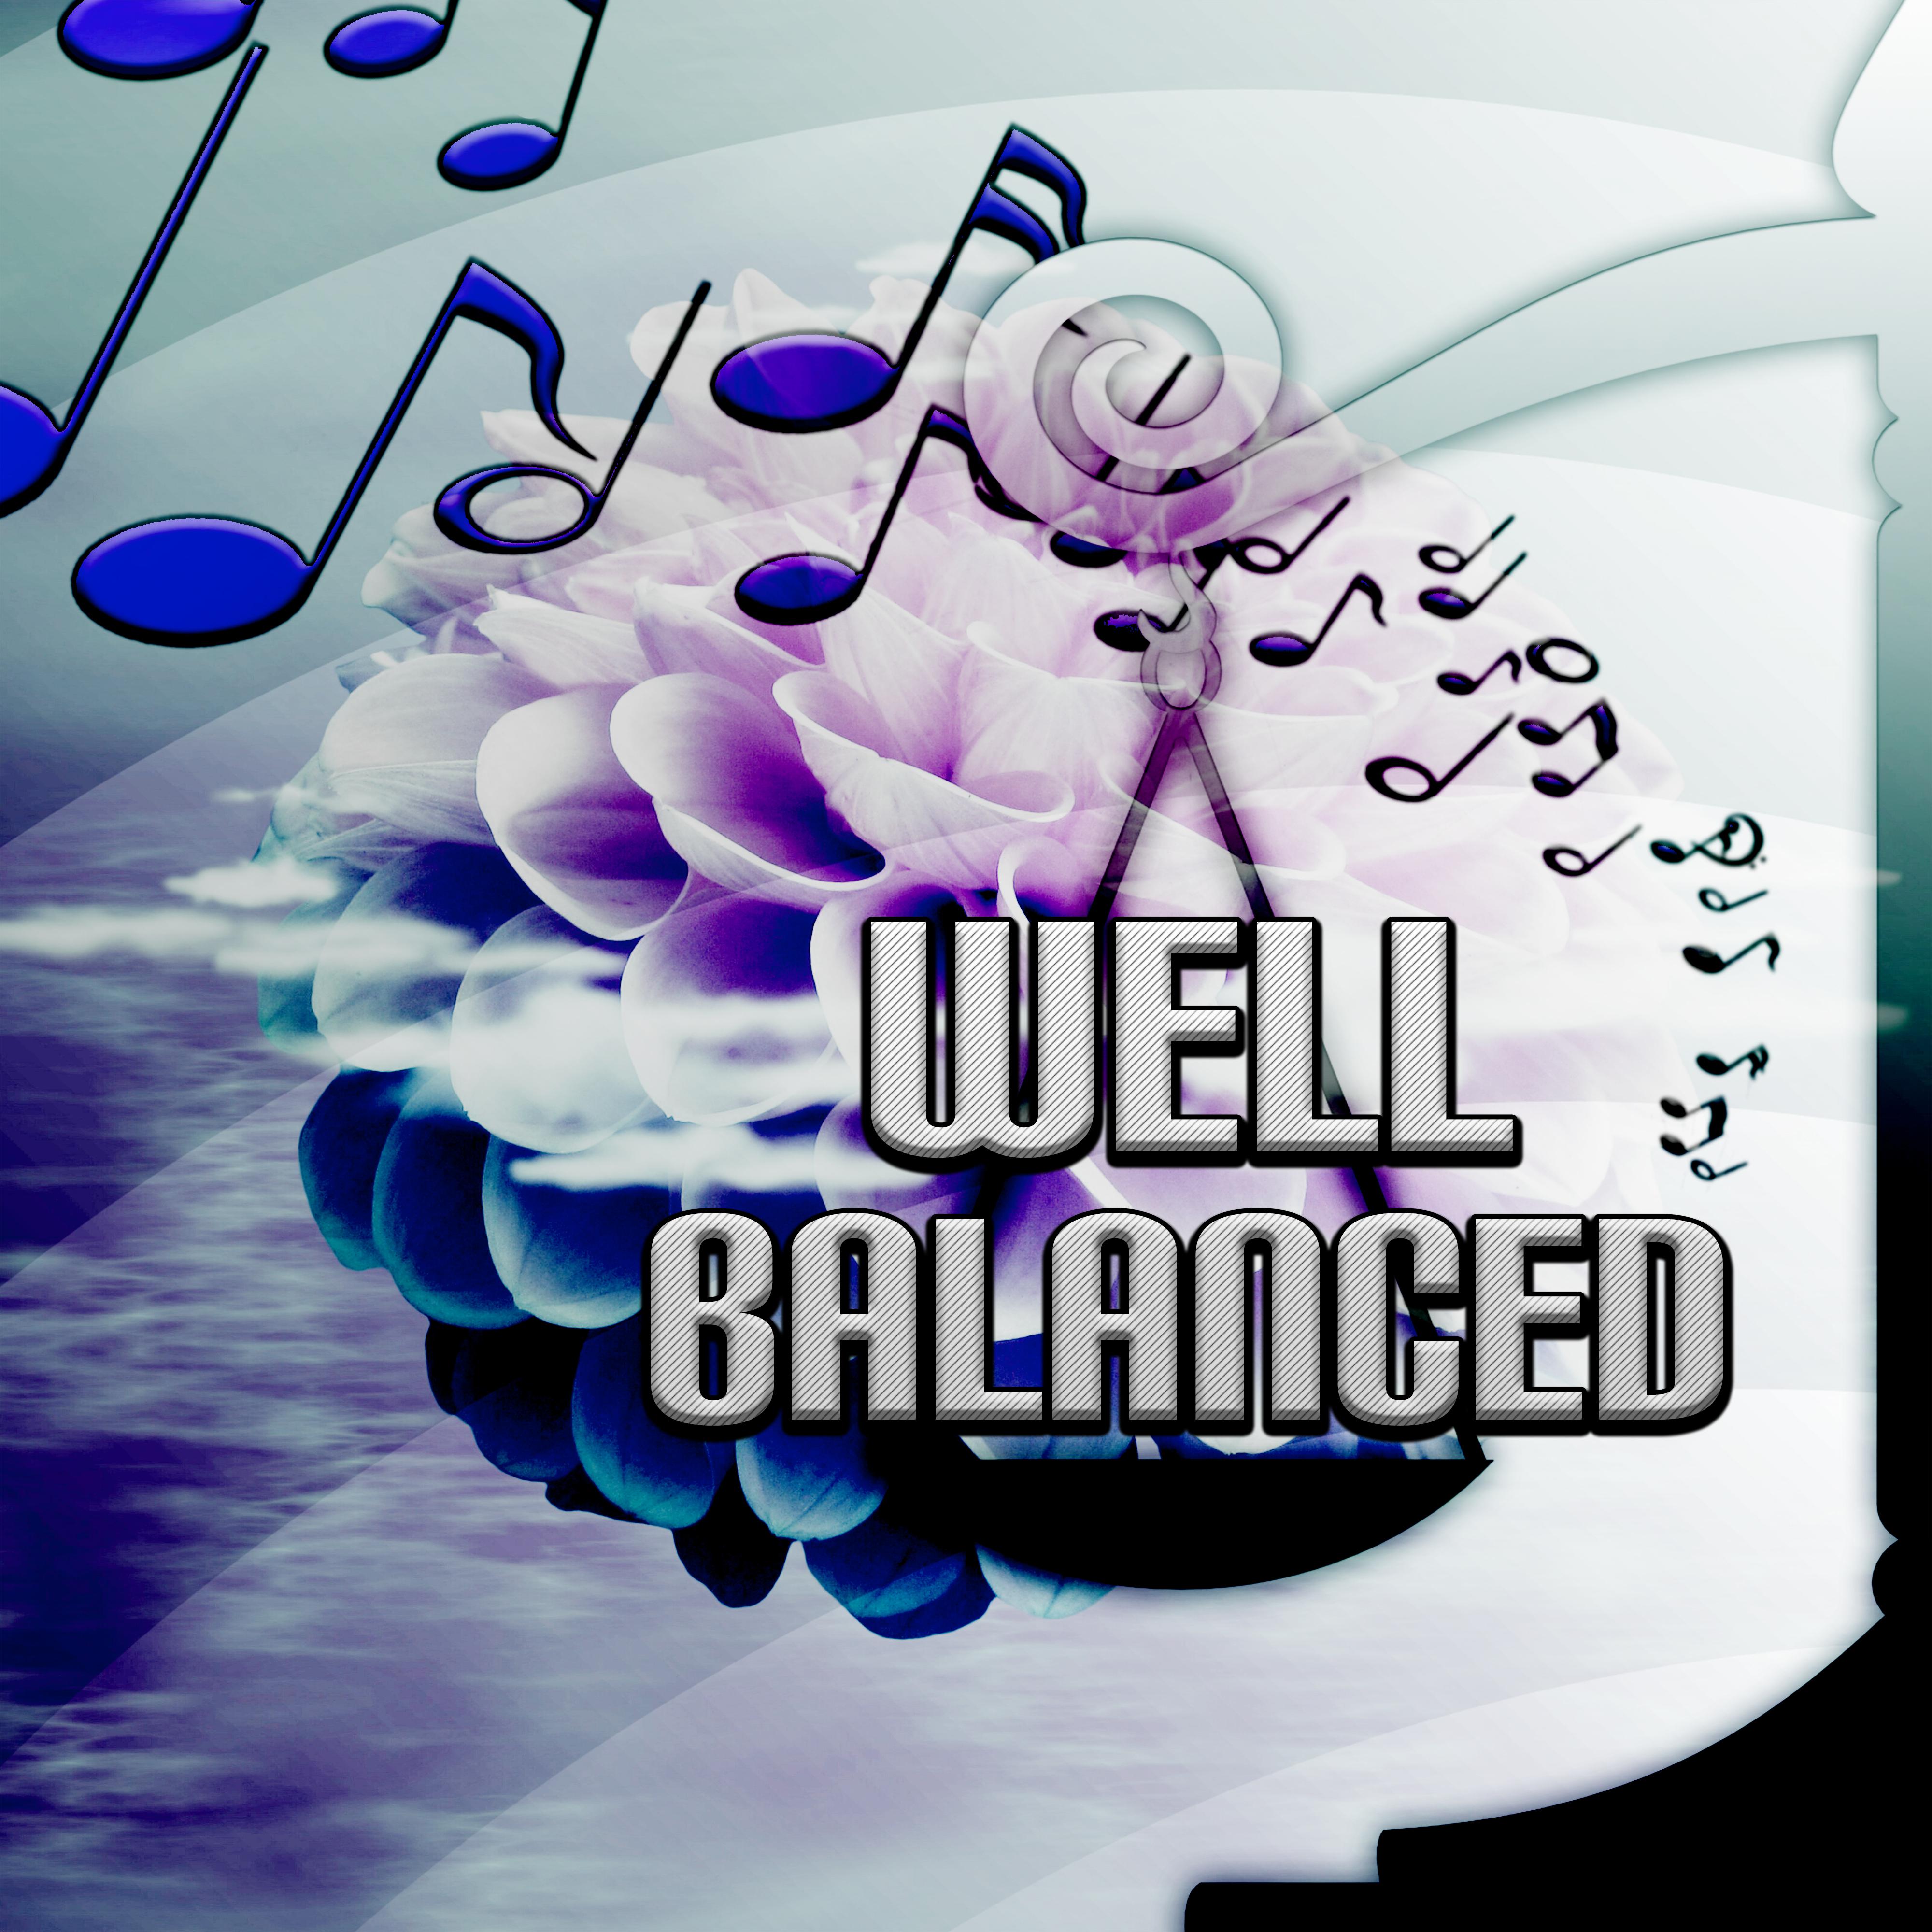 Well Balanced  Relaxing Music, Serenity, State of Mind with Nature Sounds, Harmony Body and Soul, Spiritual Healing, Yoga Exercises, Deep Meditation